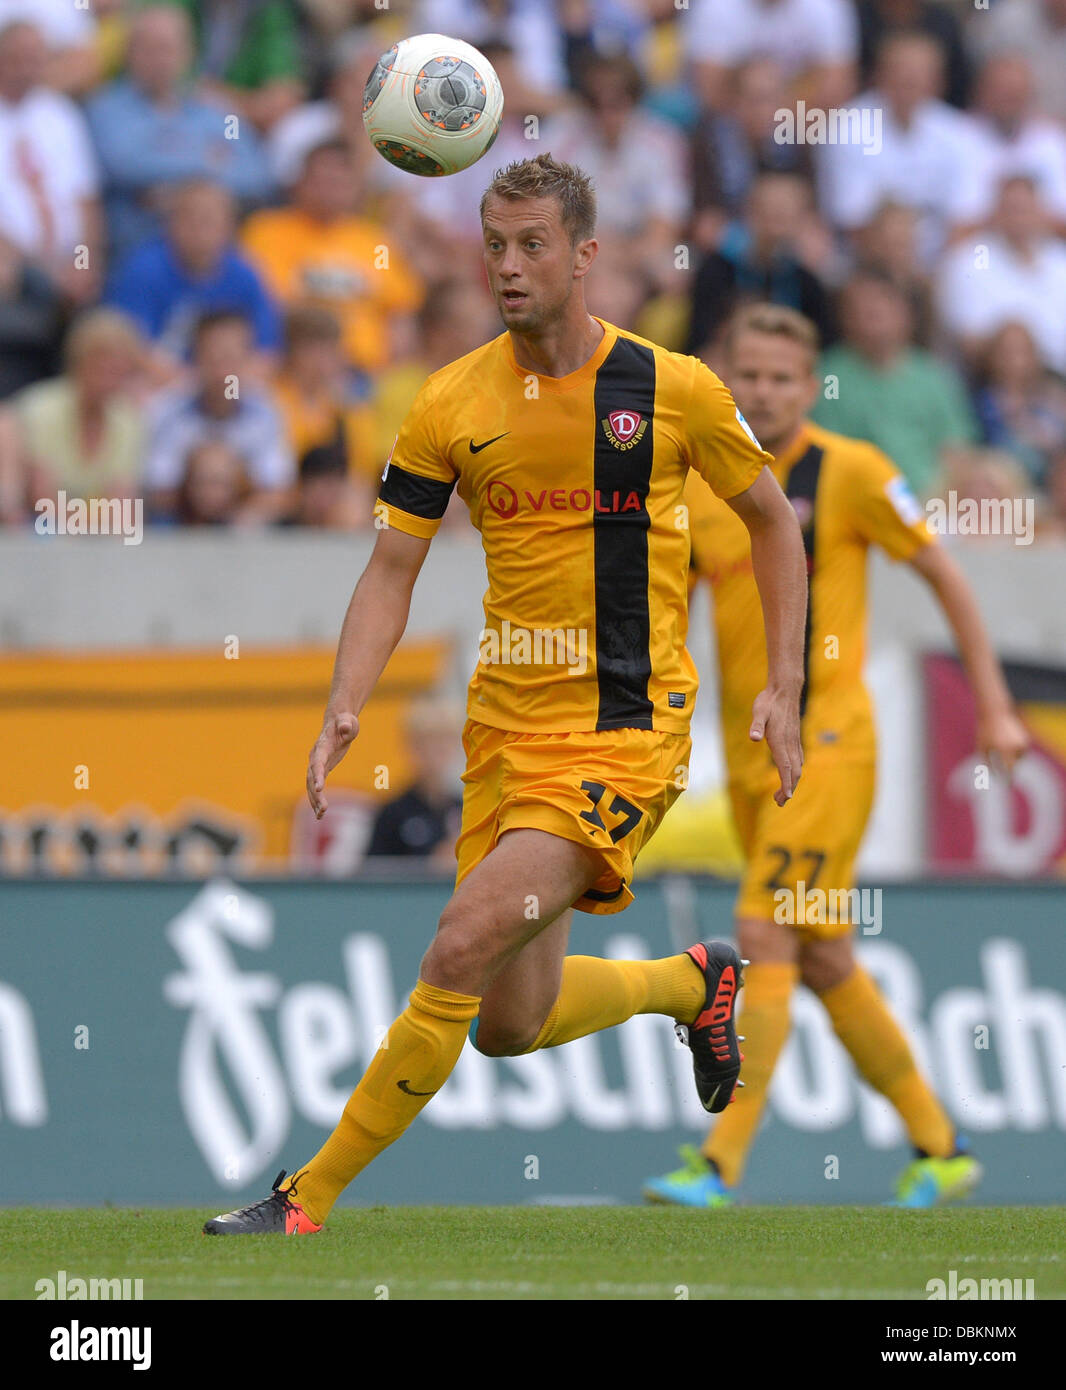 Dresden, Germany. 31st July, 2013. Dresden's Adnan Mravac during the match between SG Dynamo Dresden and Hamburger SV at gluecksgas stadium in Dresden, Germany, 31 July 2013. The revenue from the match will go to the victims of the 2013 floods. Photo: THOMAS EISENHUTH/dpa/Alamy Live News Stock Photo